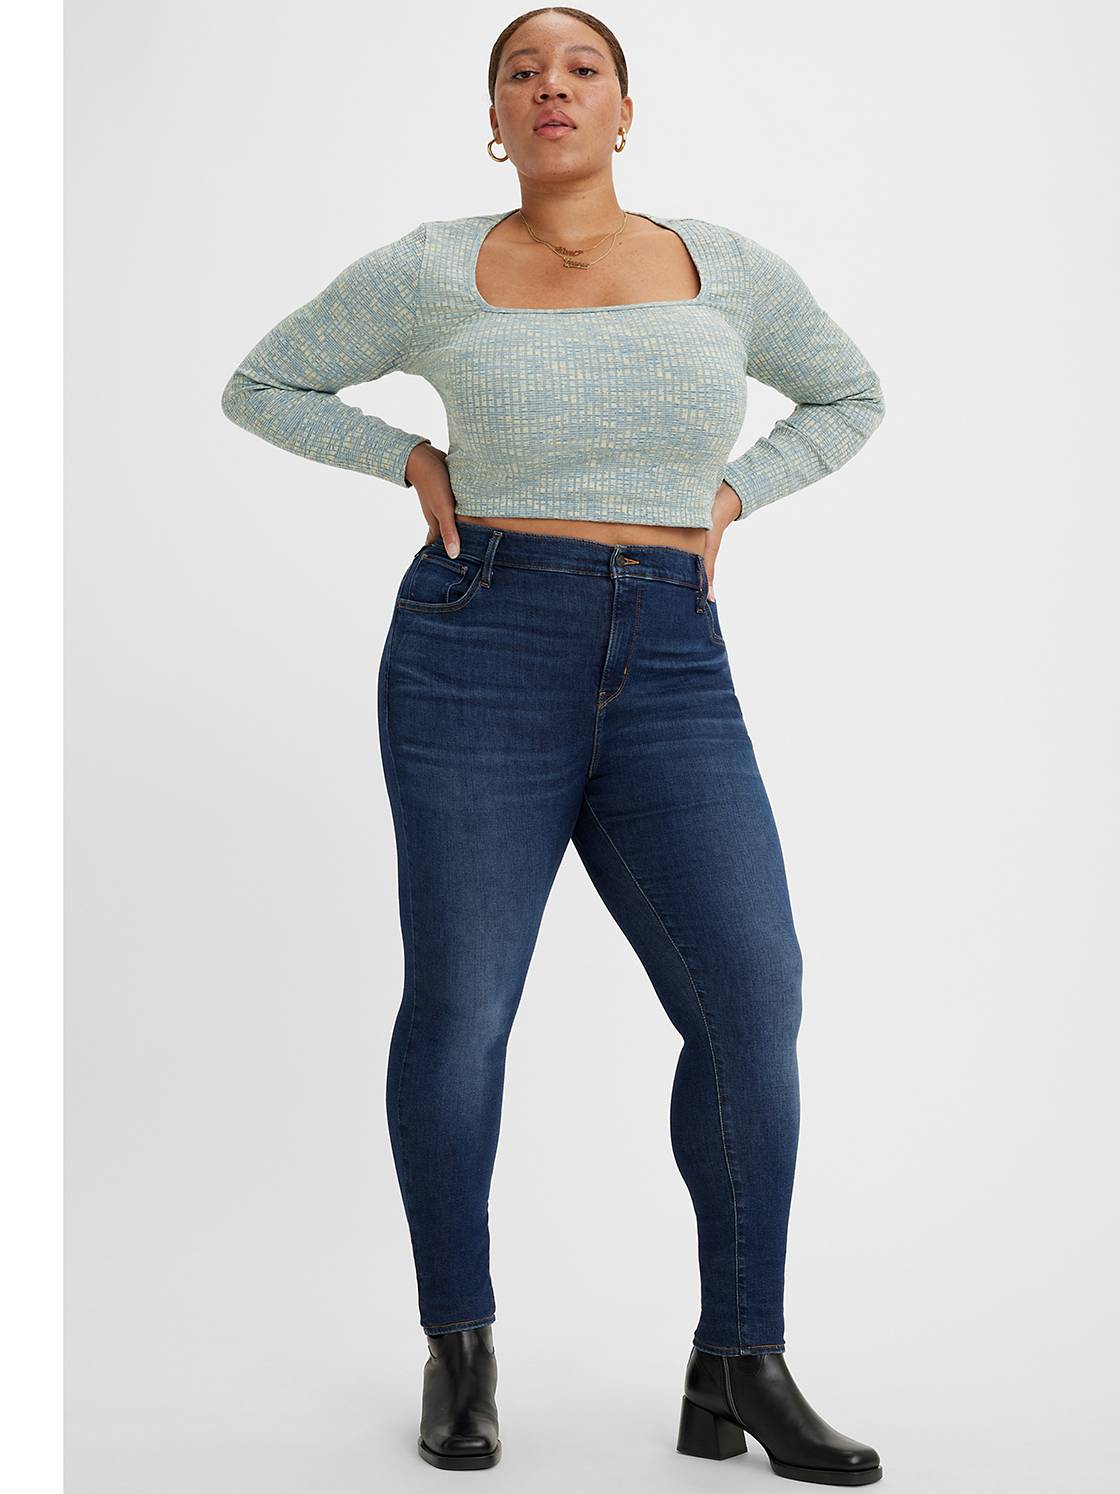 720™ High Rise Super Skinny Jeans (Plus Size) 1